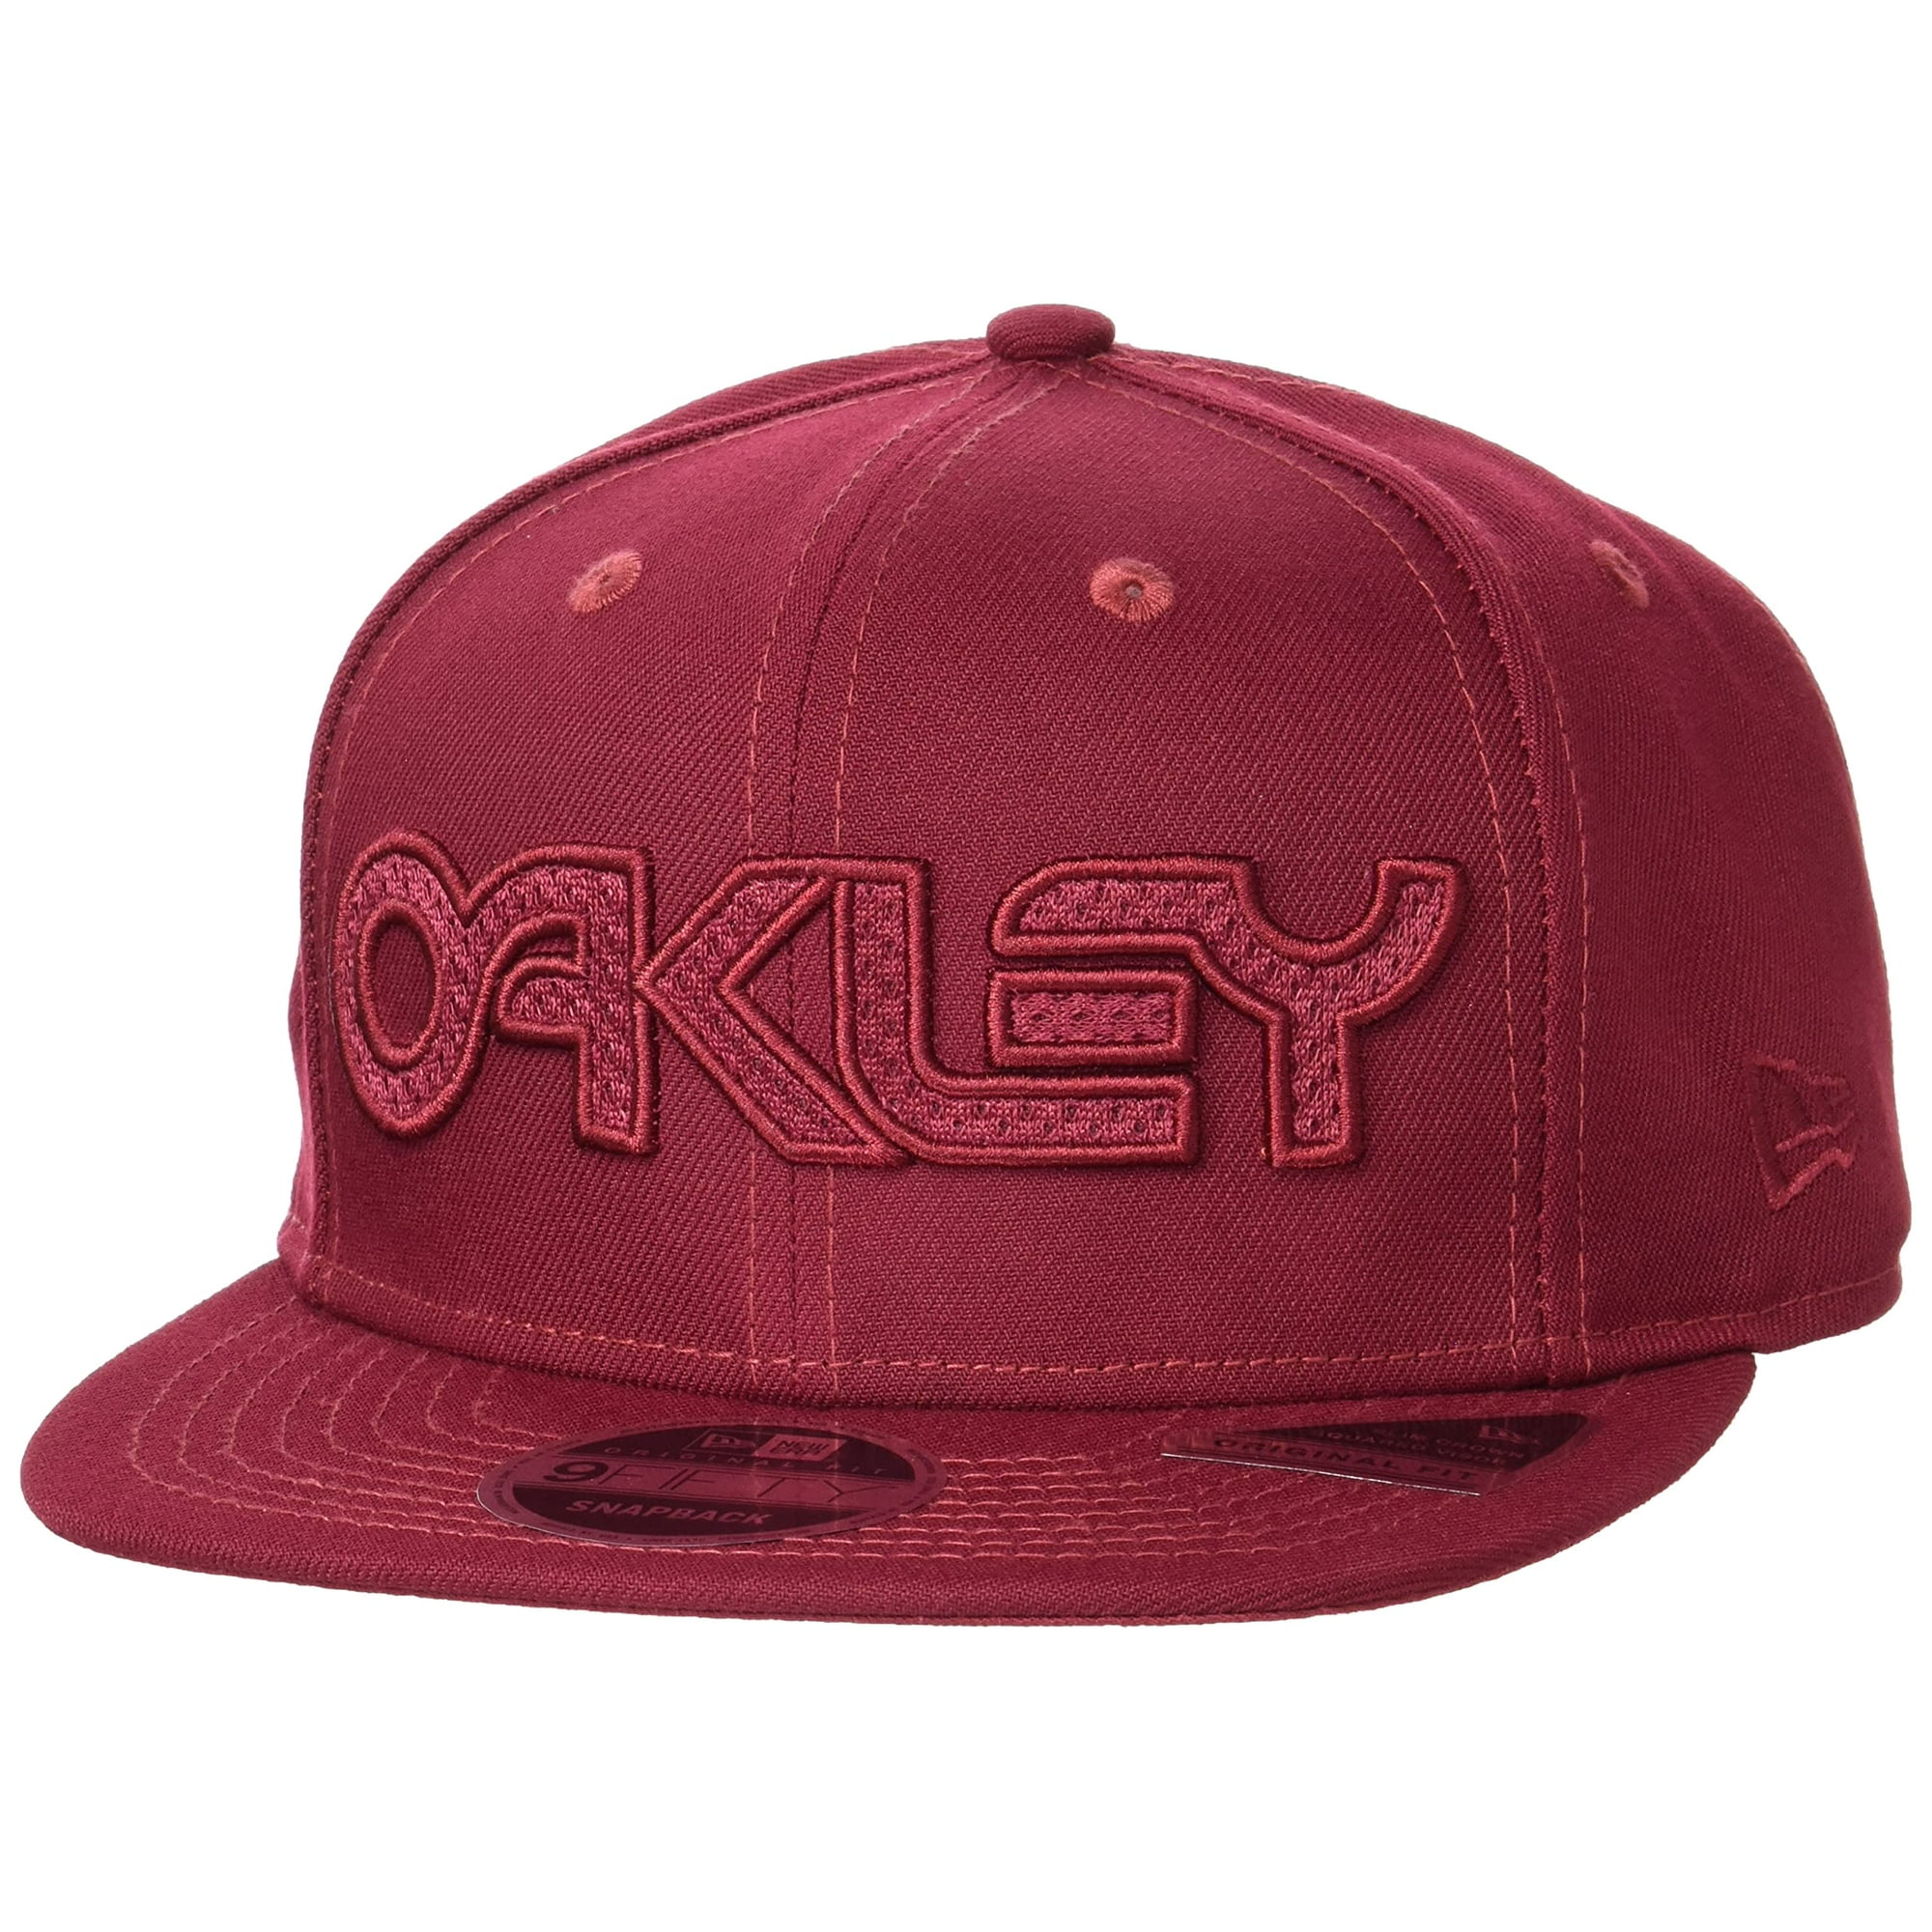 Oakley B1B Meshed FB HAT, Iron RED, One Size | Walmart Canada